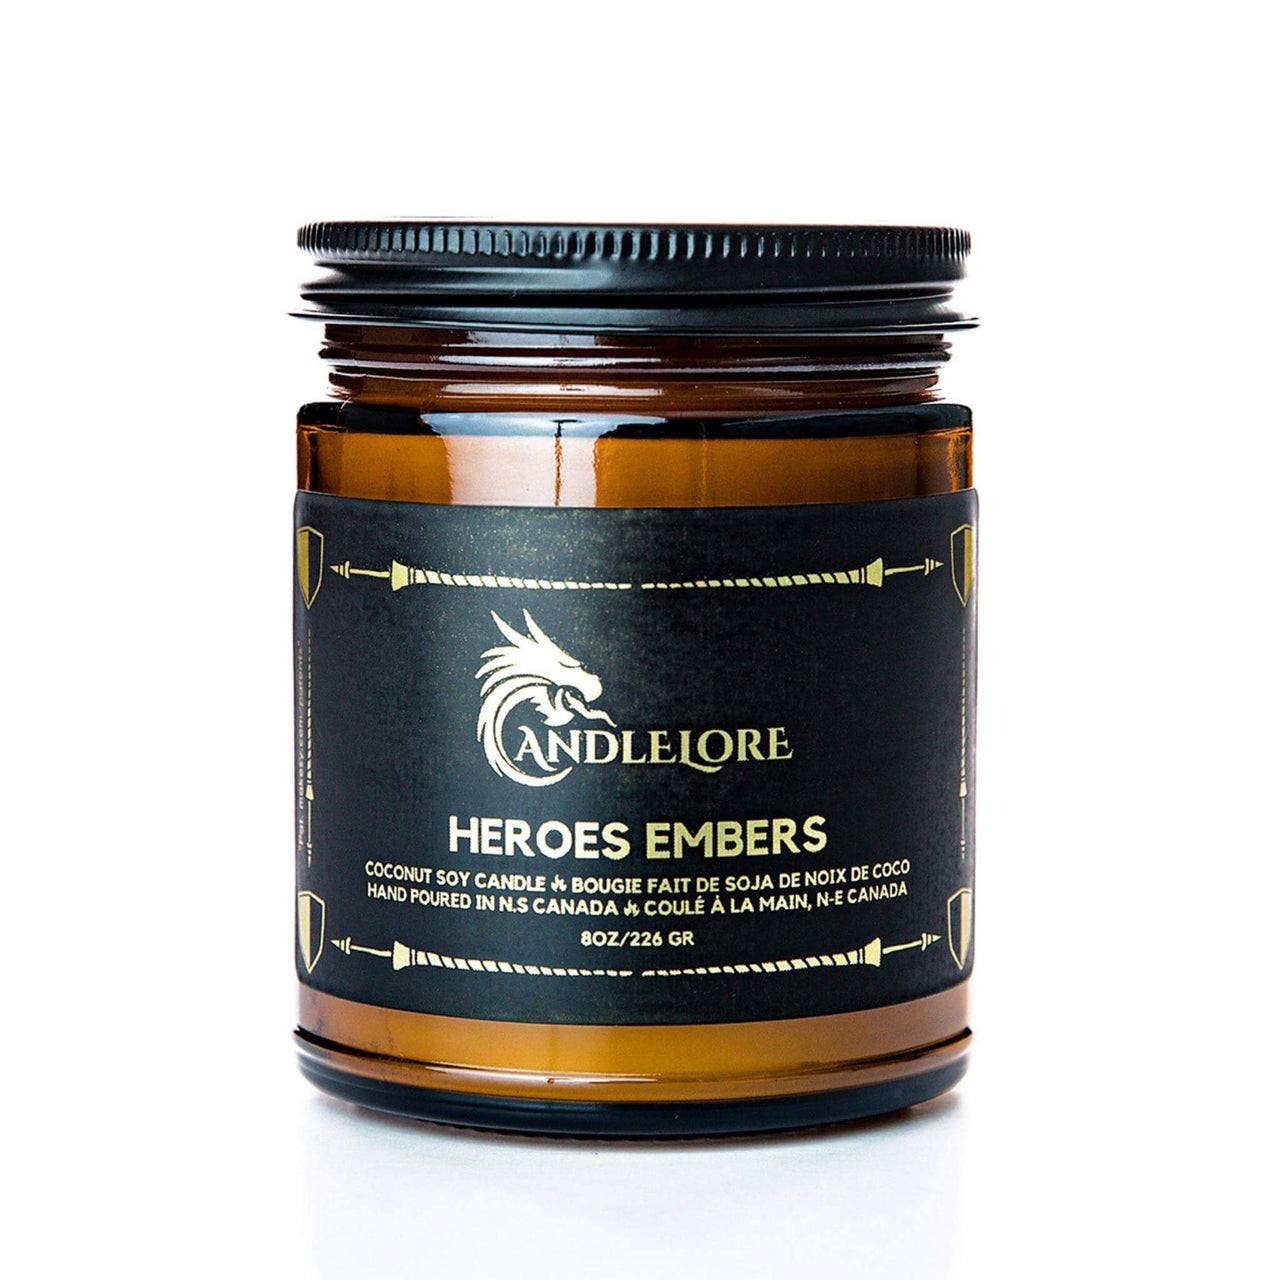 Medium Heroes Embers candle with white background